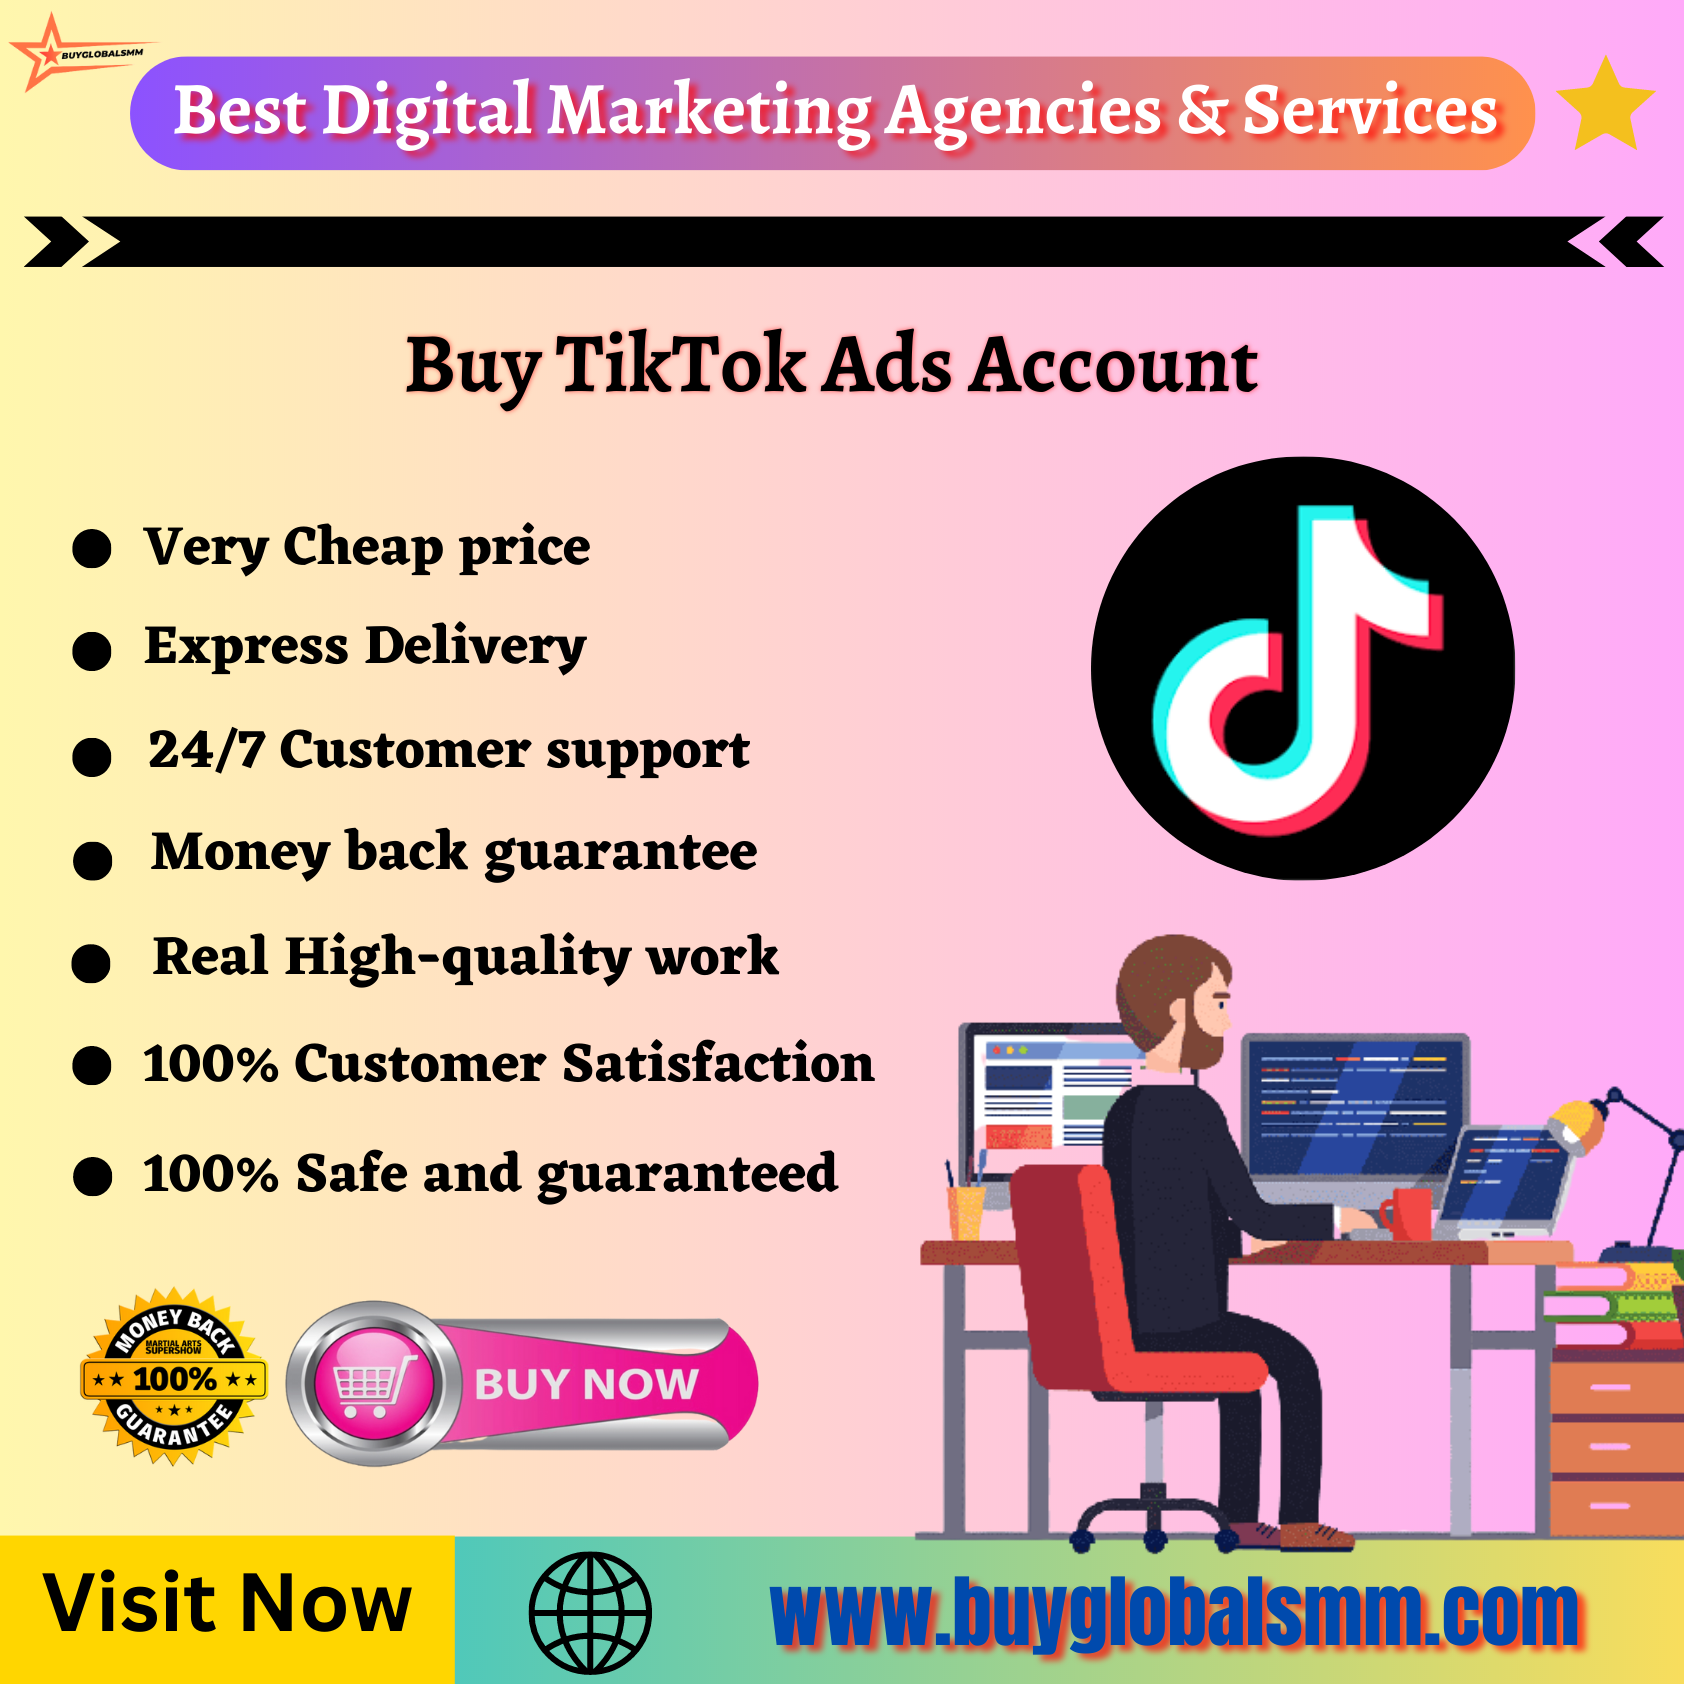 Buy TikTok Ads Account-100% trusted service, and cheap...